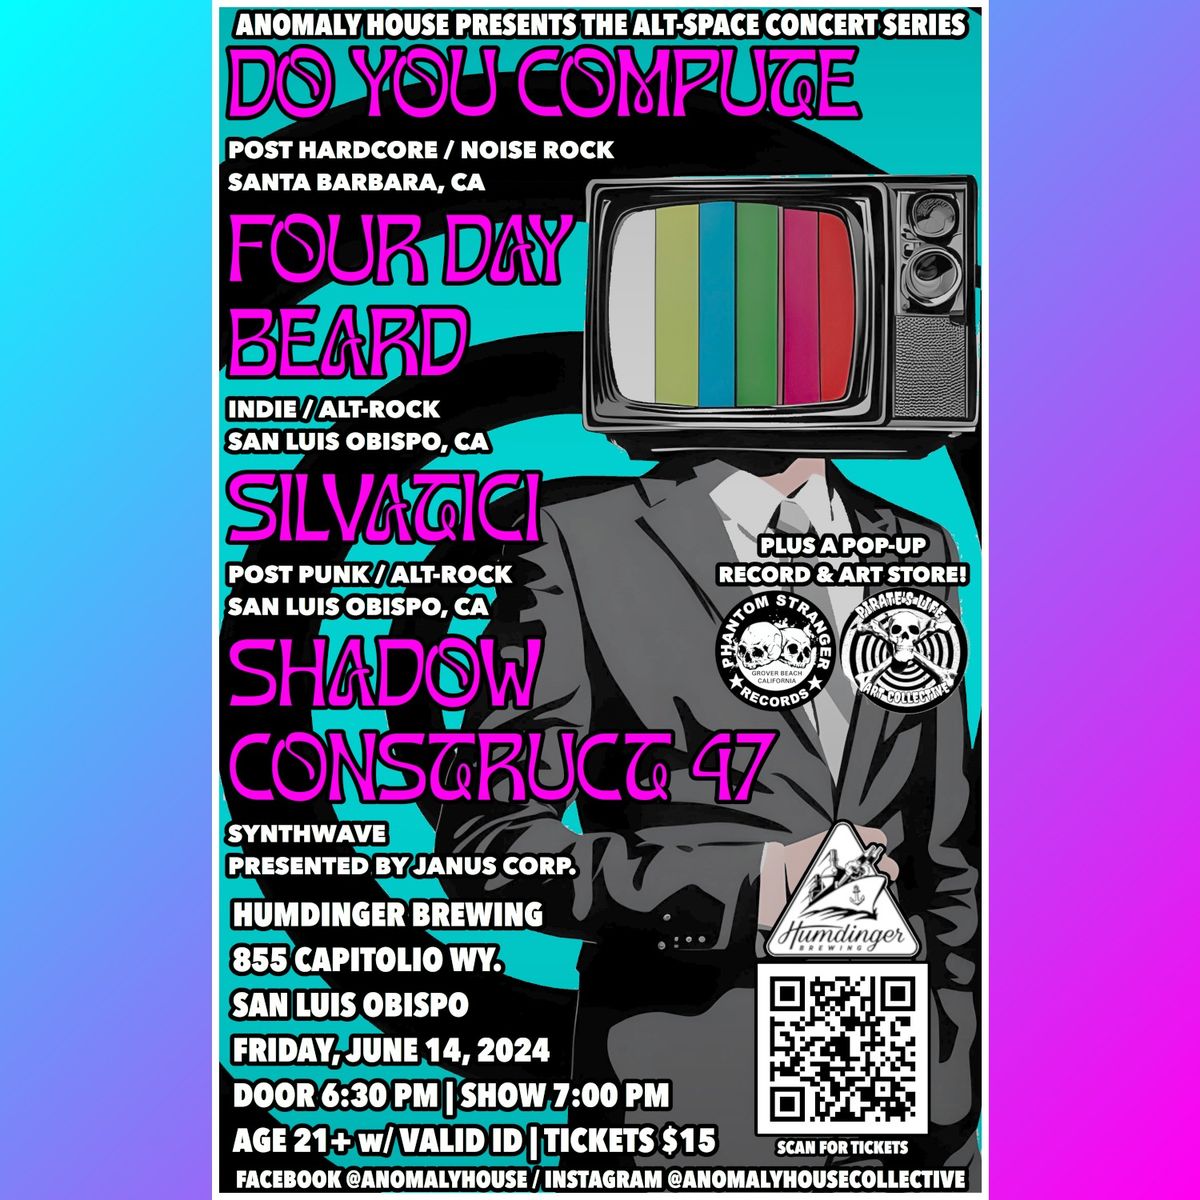 DO YOU COMPUTE, FOUR DAY BEARD, SILVATICI, and SHADOW CONSTRUCT 47 Live in Concert